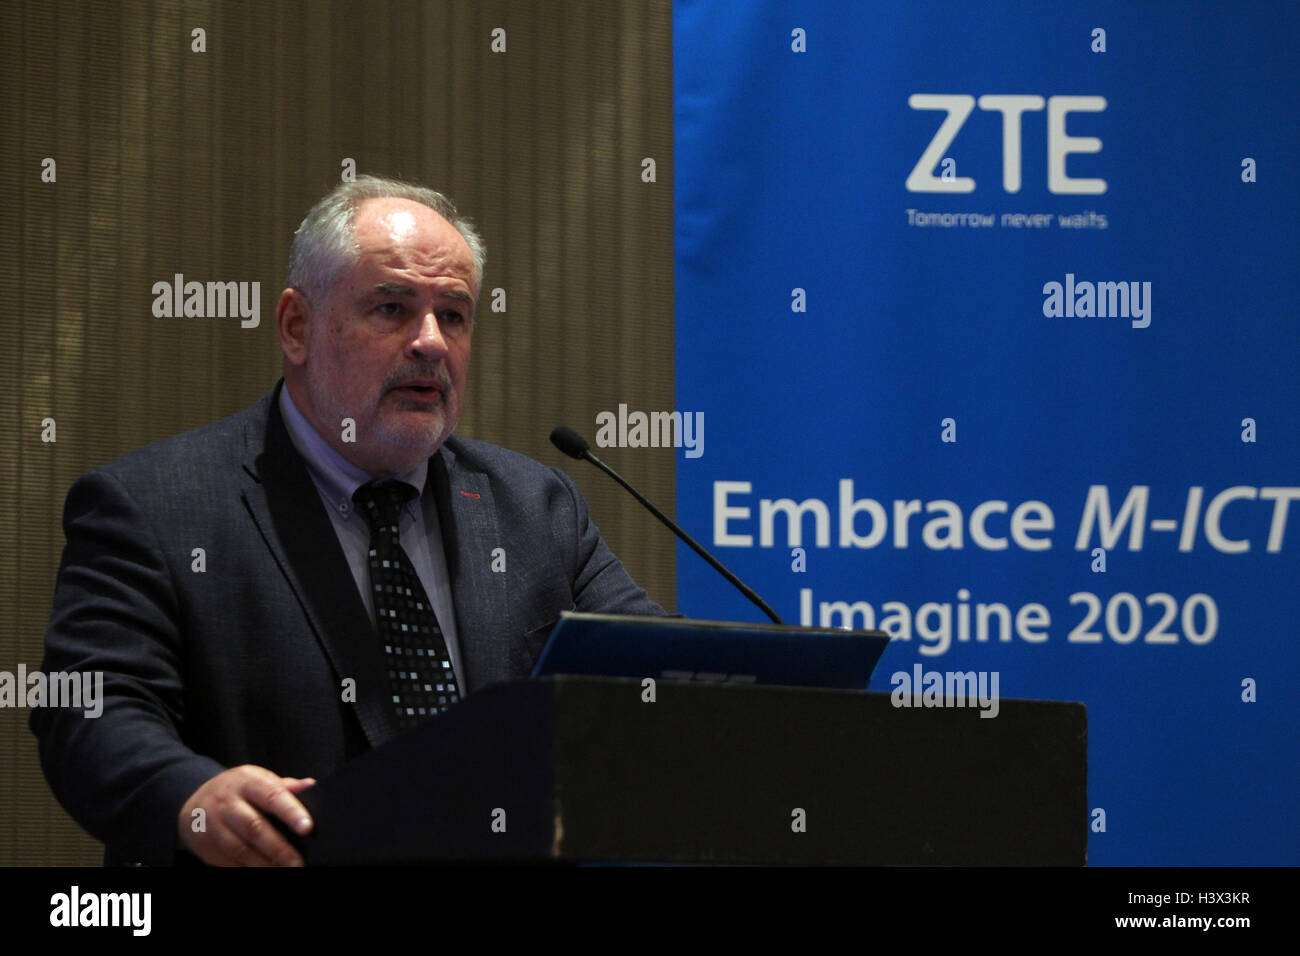 Athens. 12th Oct, 2016. Alternate Minister for Research and Technology of Greece Costas Fotakis delivers a speech during ZTE Greece Day 2016 in Athens, Greece on Oct. 12, 2016. Chinese telecommunication giant ZTE Corporation presented its latest innovative products and services and its vision for the future in an Athens forum on Wednesday. © Marios Lolos/Xinhua/Alamy Live News Stock Photo